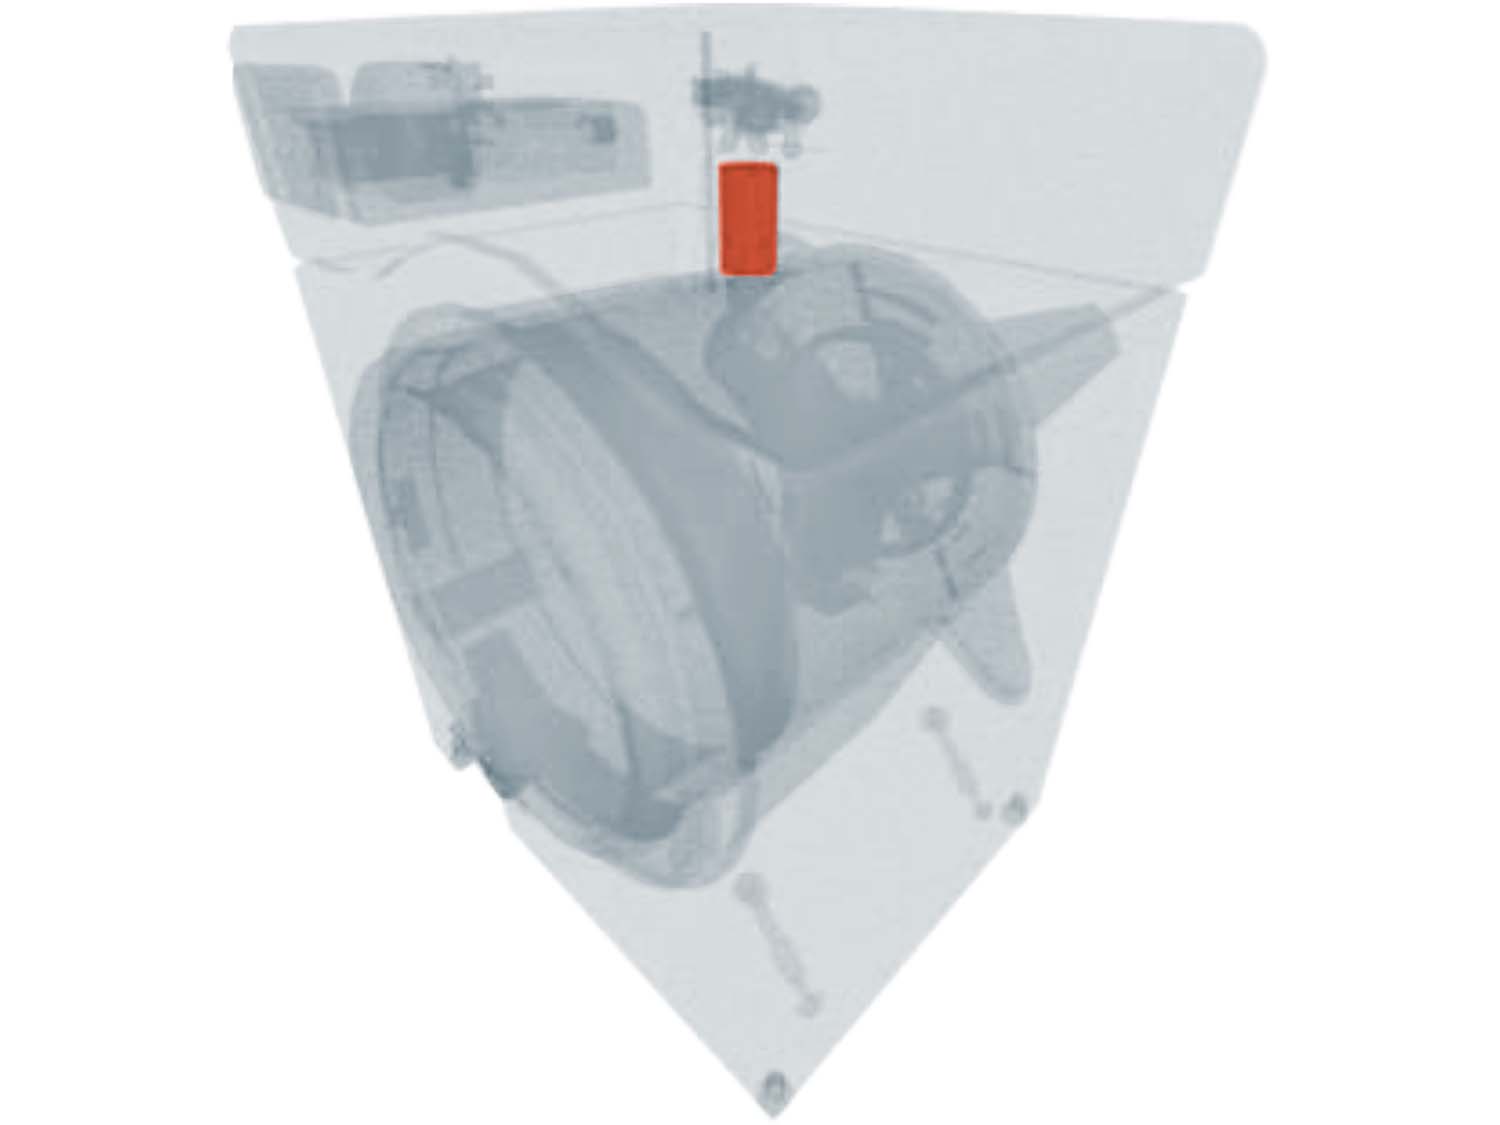 A 3D diagram showing the components of a front load washer and specifying the location of the capacitor